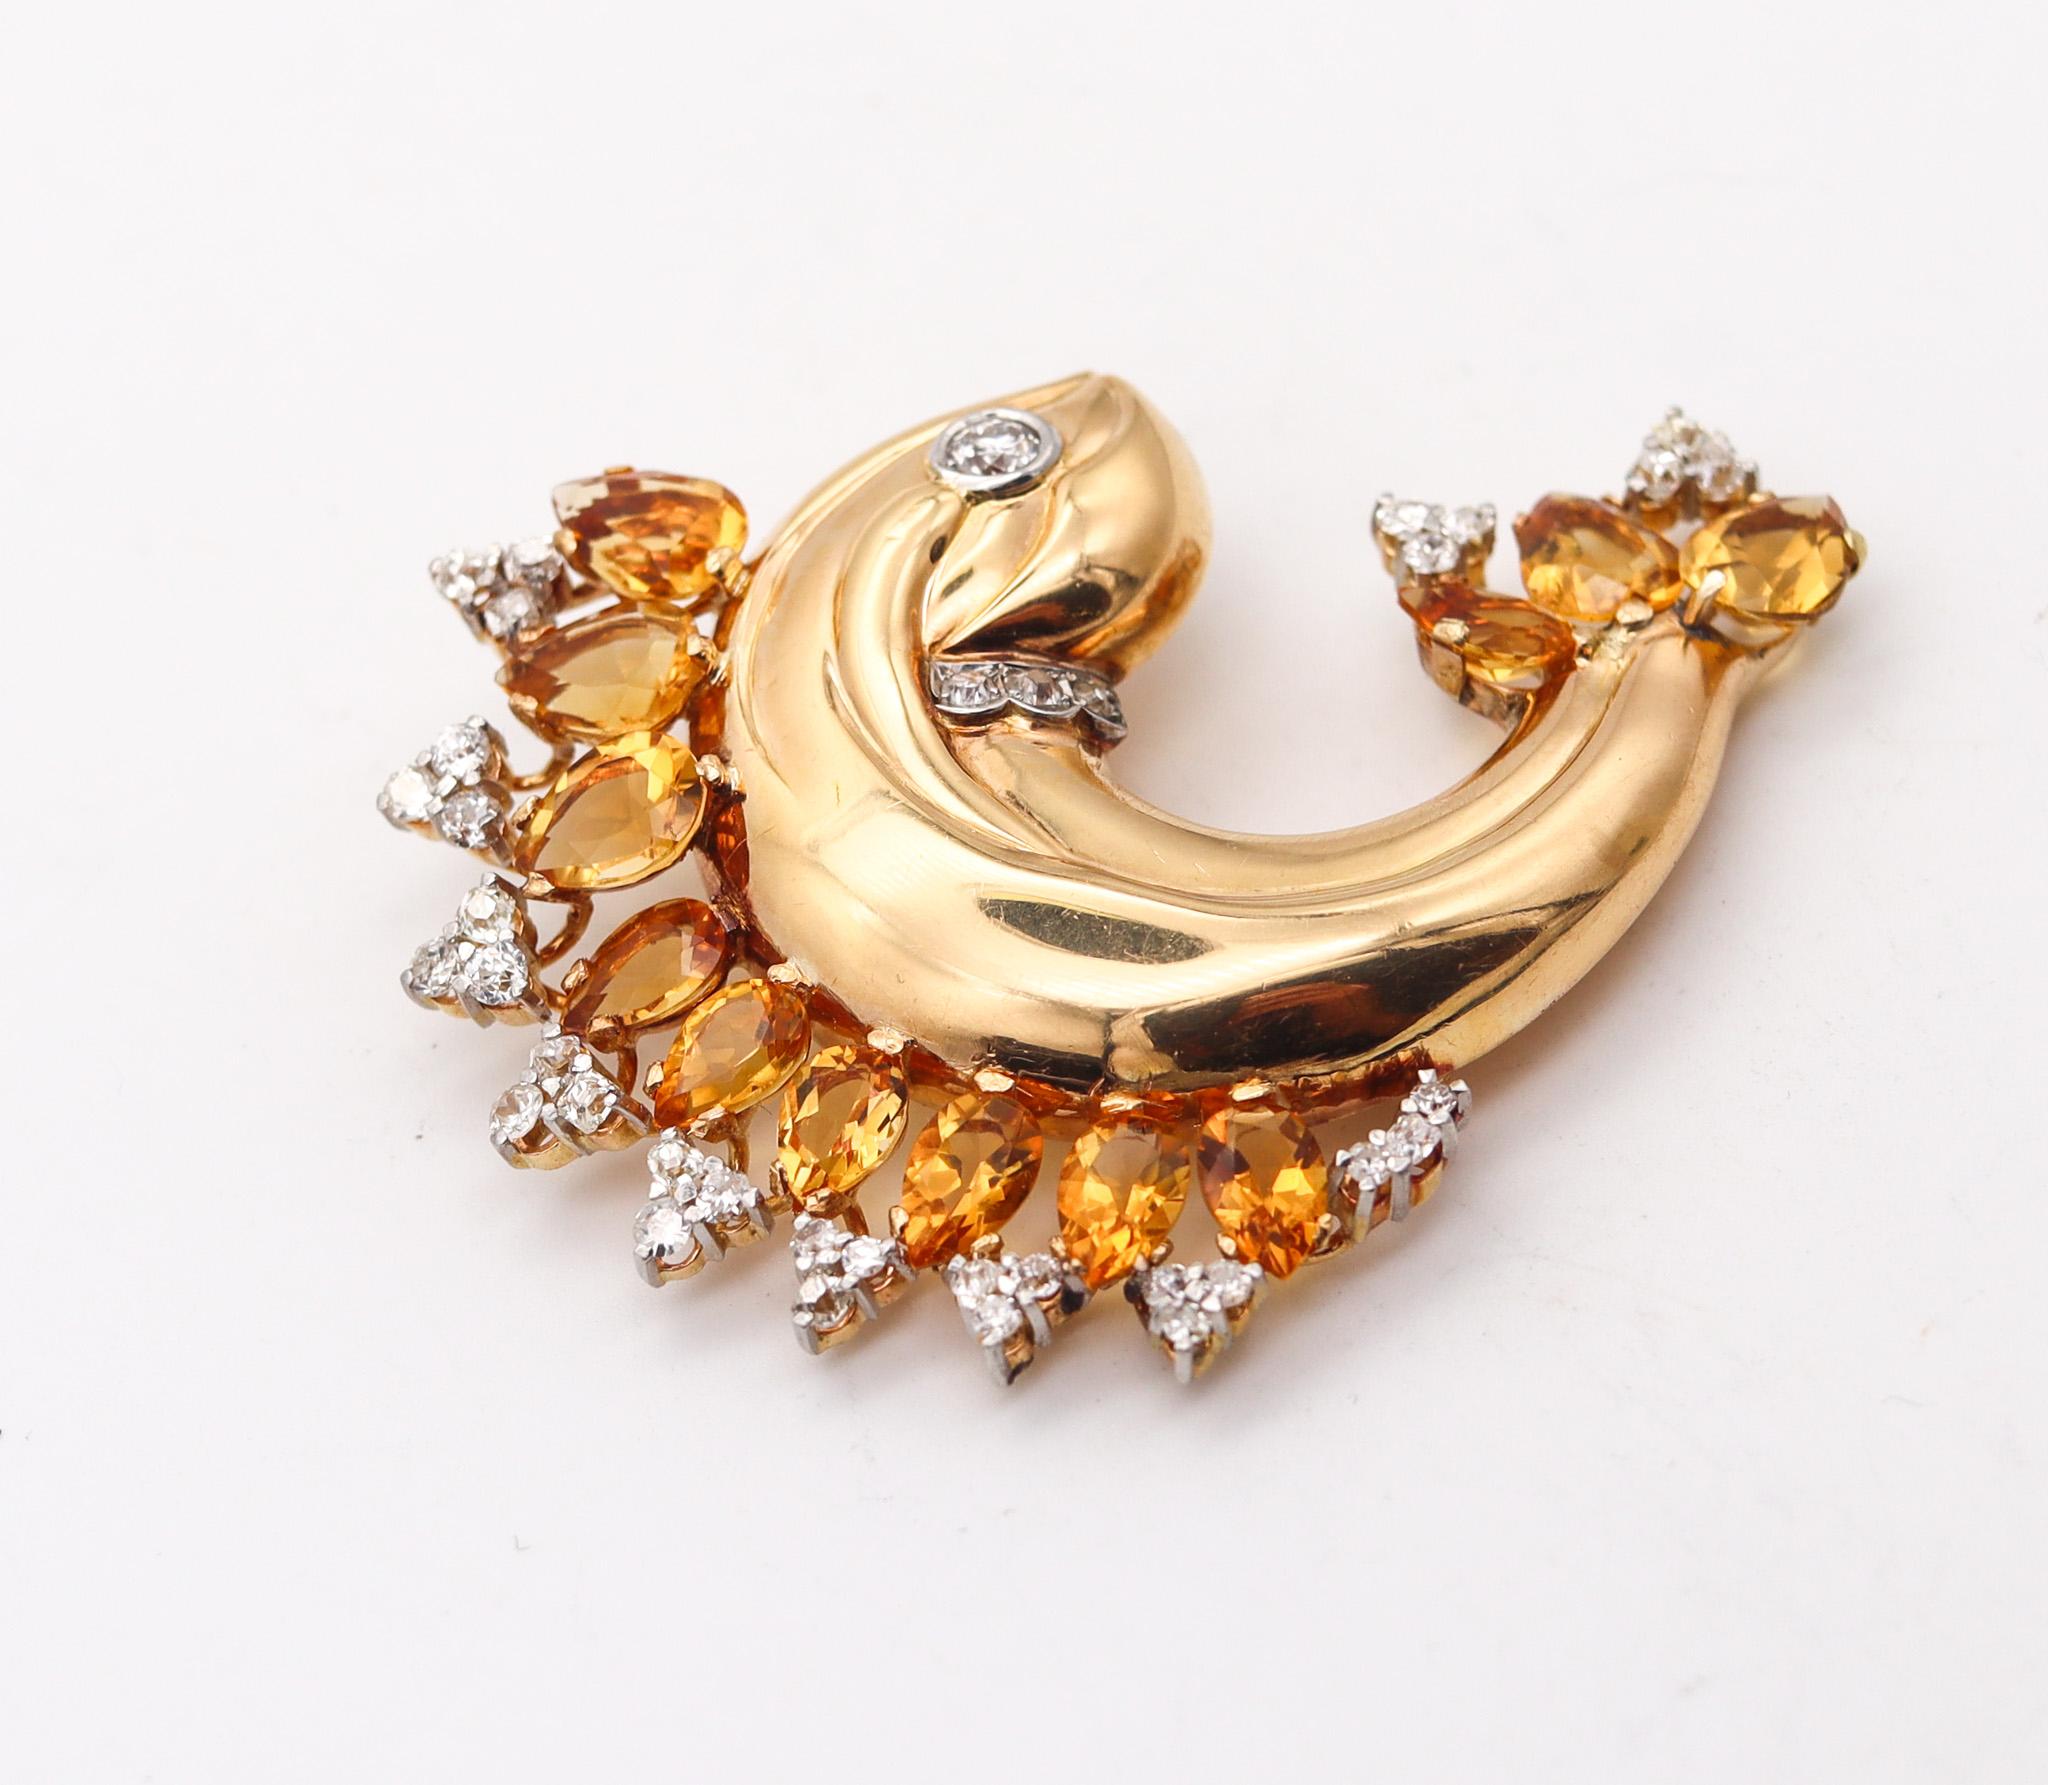 Mixed Cut Austria 1930 Art Deco Fish Brooch In 18Kt Gold With 33.28 Ctw Diamonds & Citrine For Sale